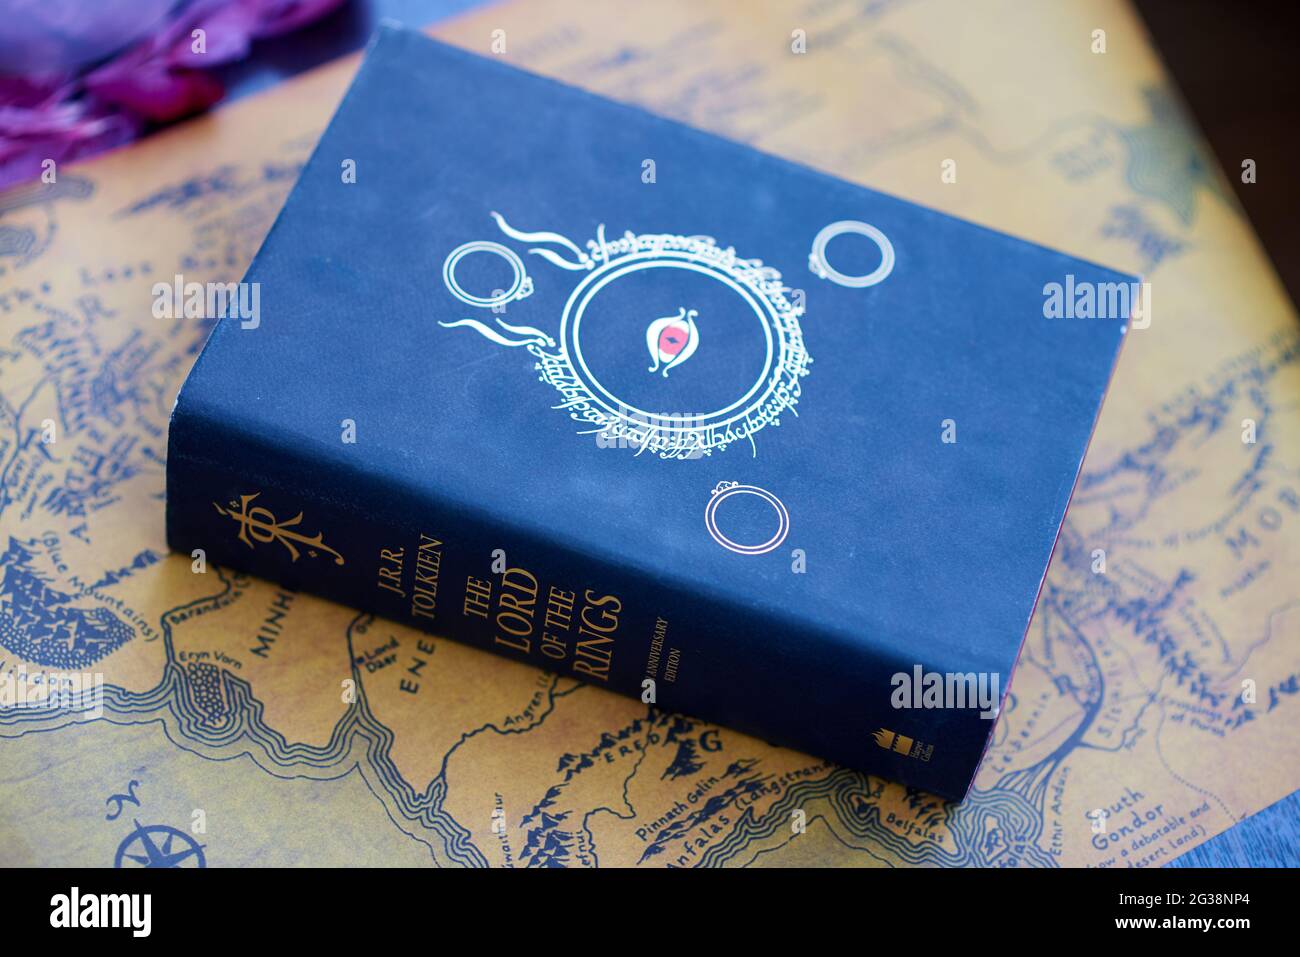 Black thick Lord of the Rings book lies on Middle-Earth map Stock Photo